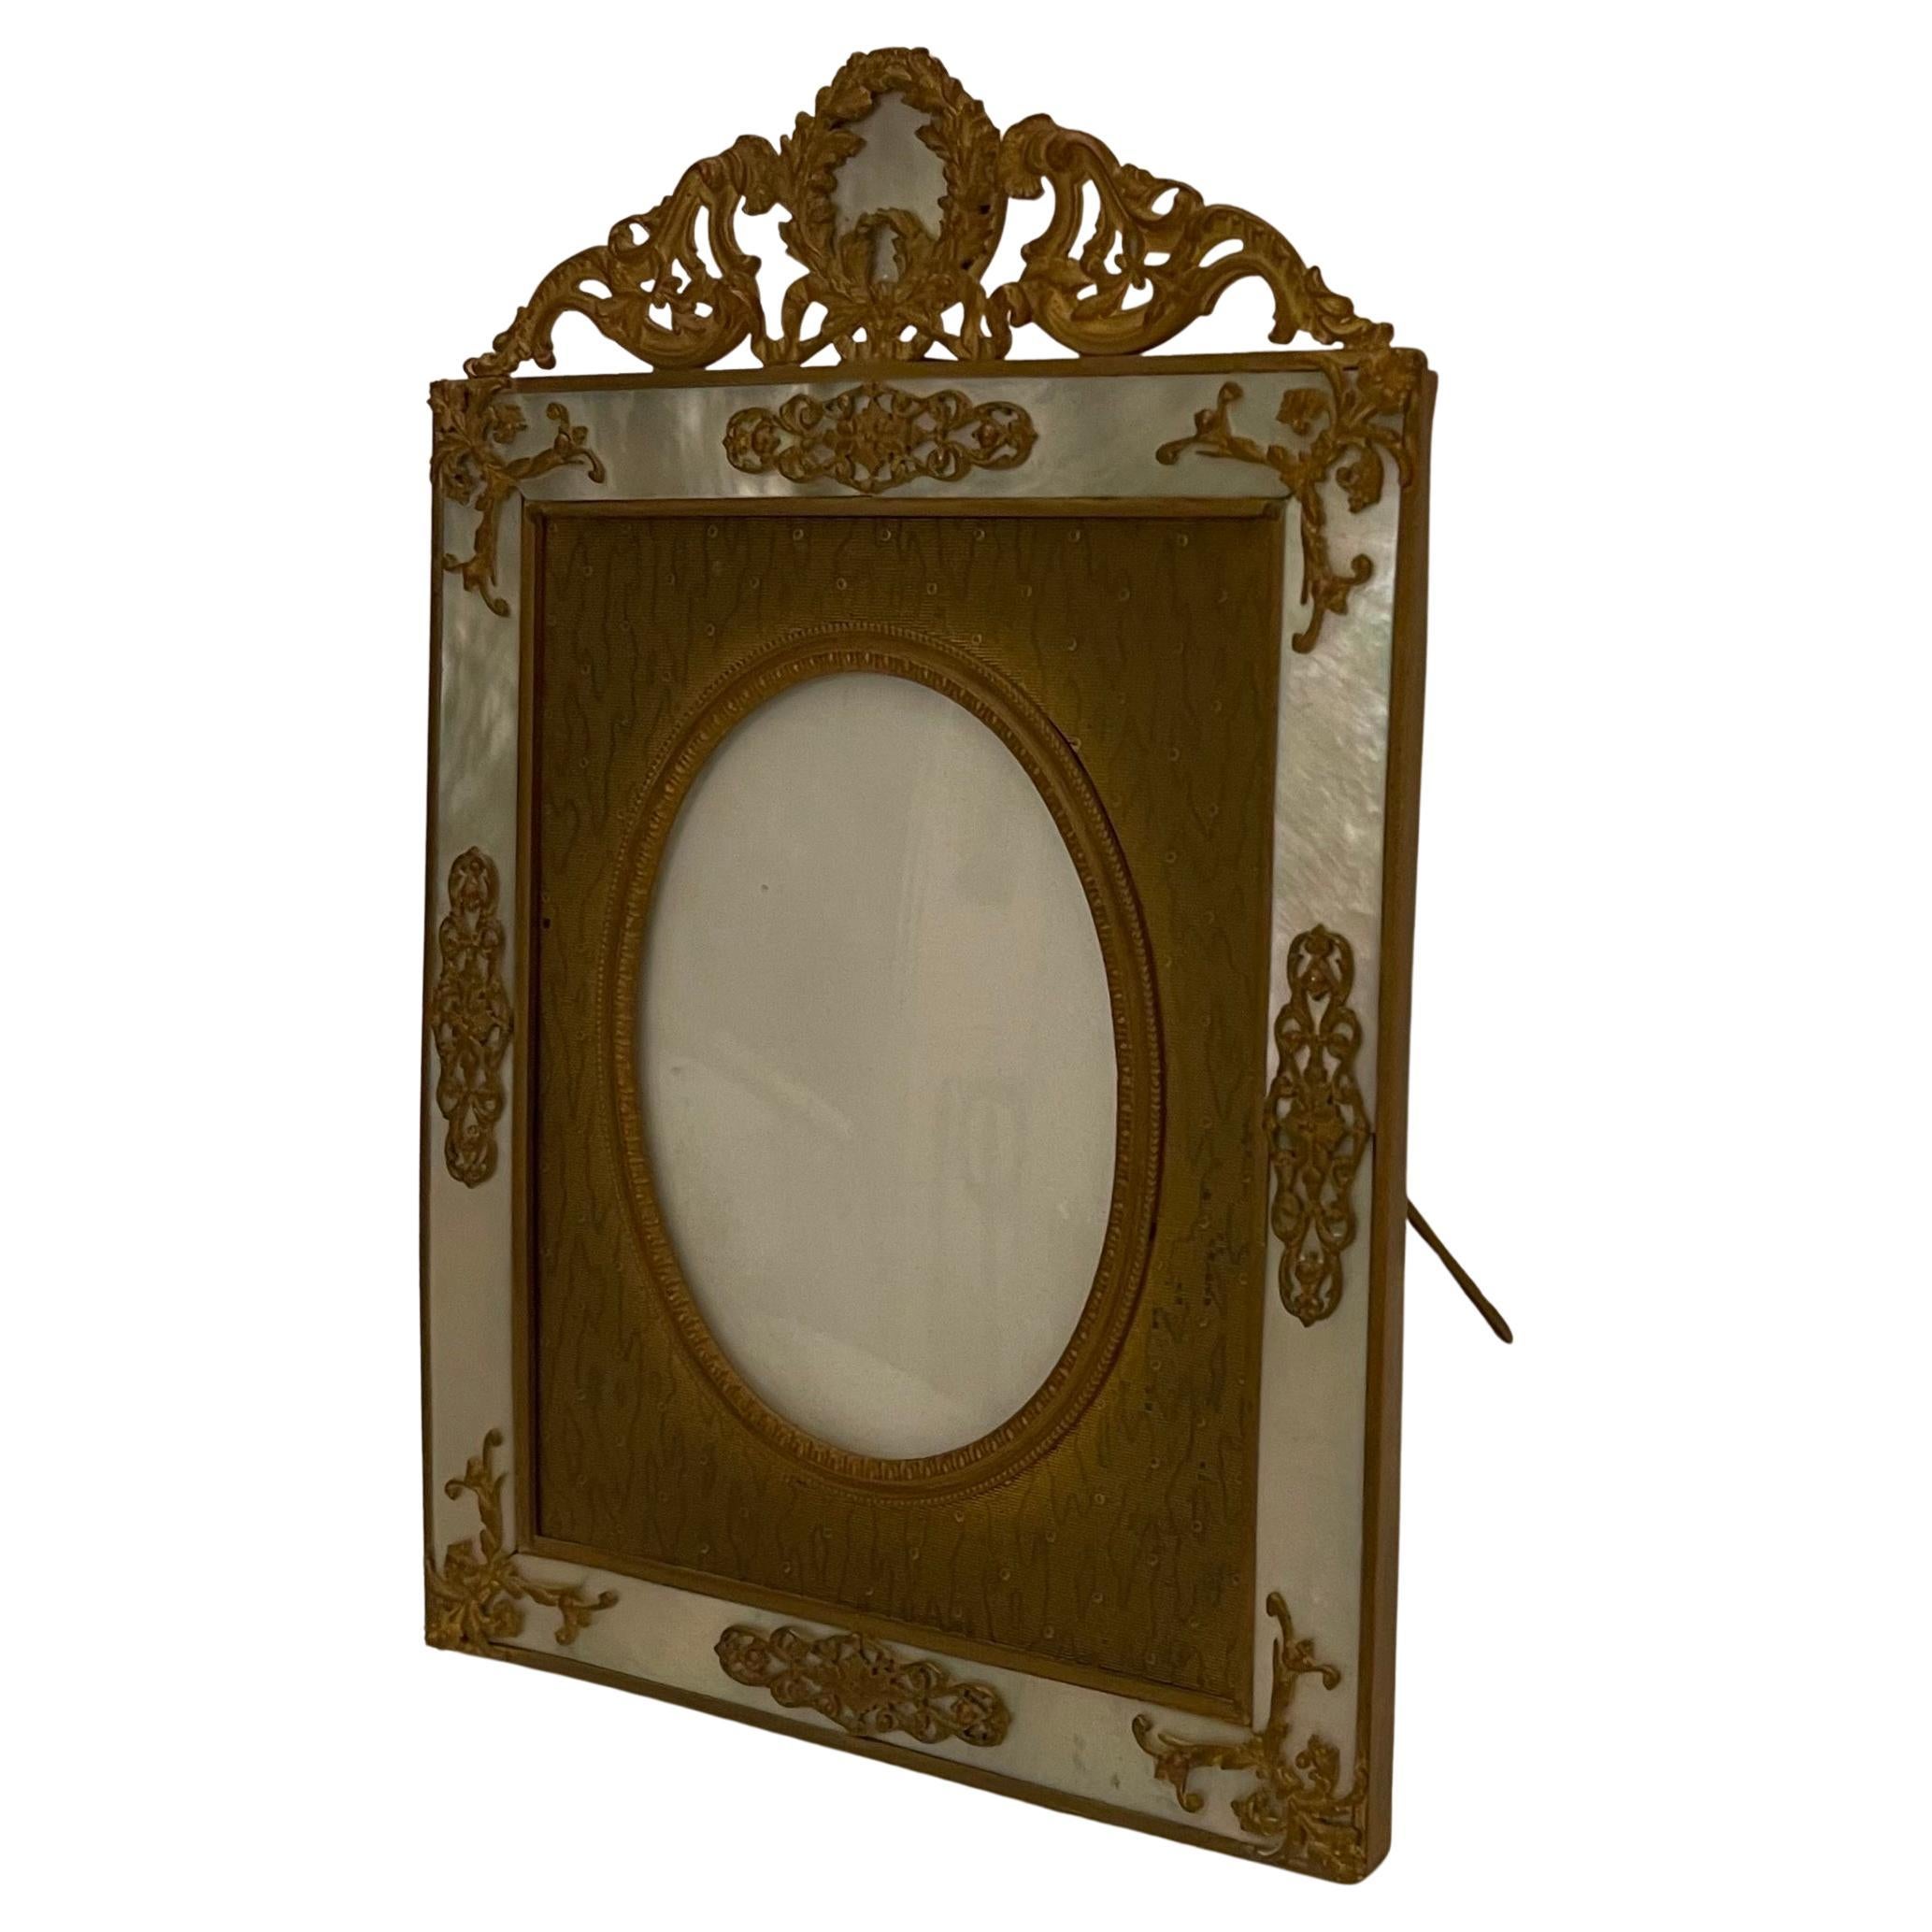 Outstanding French dore bronze ormolu & mother of pearl picture / photo frame with easel back.